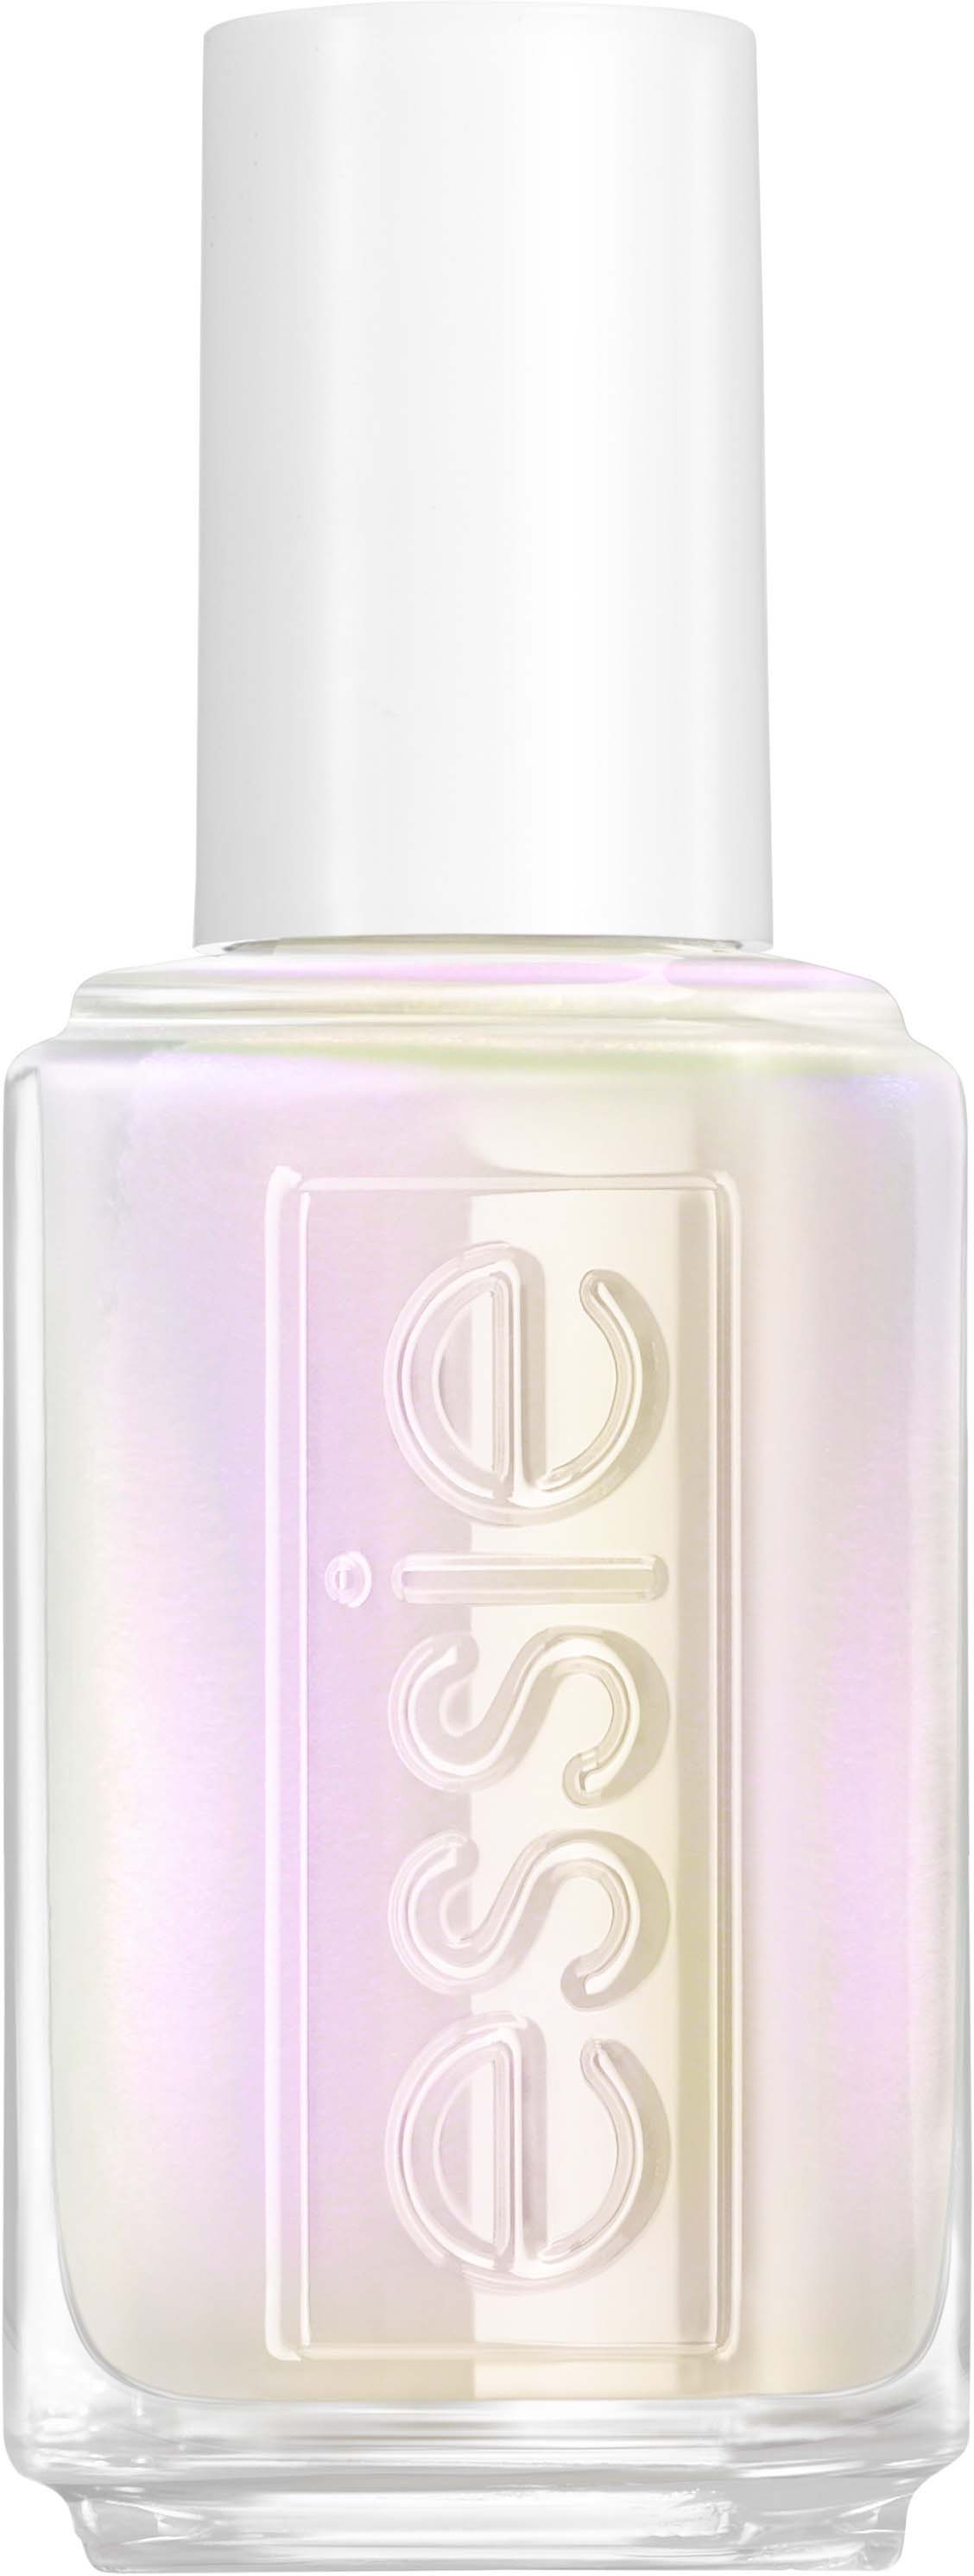 Essie Nail Iced 460 ml 10 Coat Filter FX Out Expressie Top